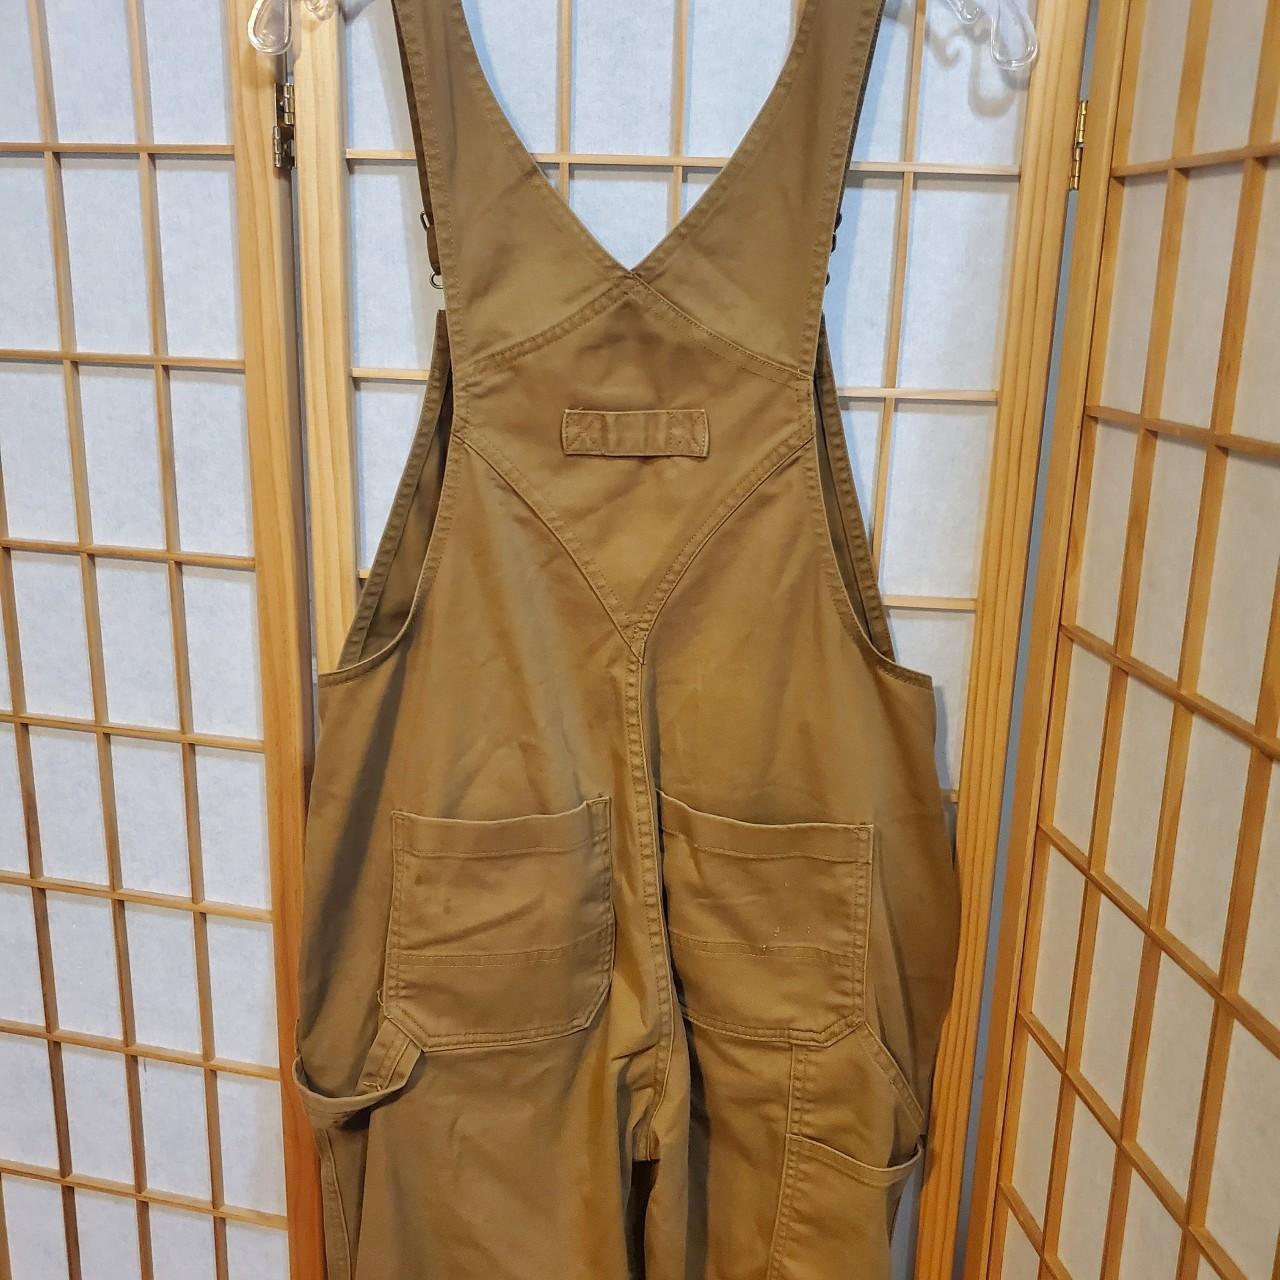 Duluth Trading Company Women's Tan Dungarees-overalls (3)